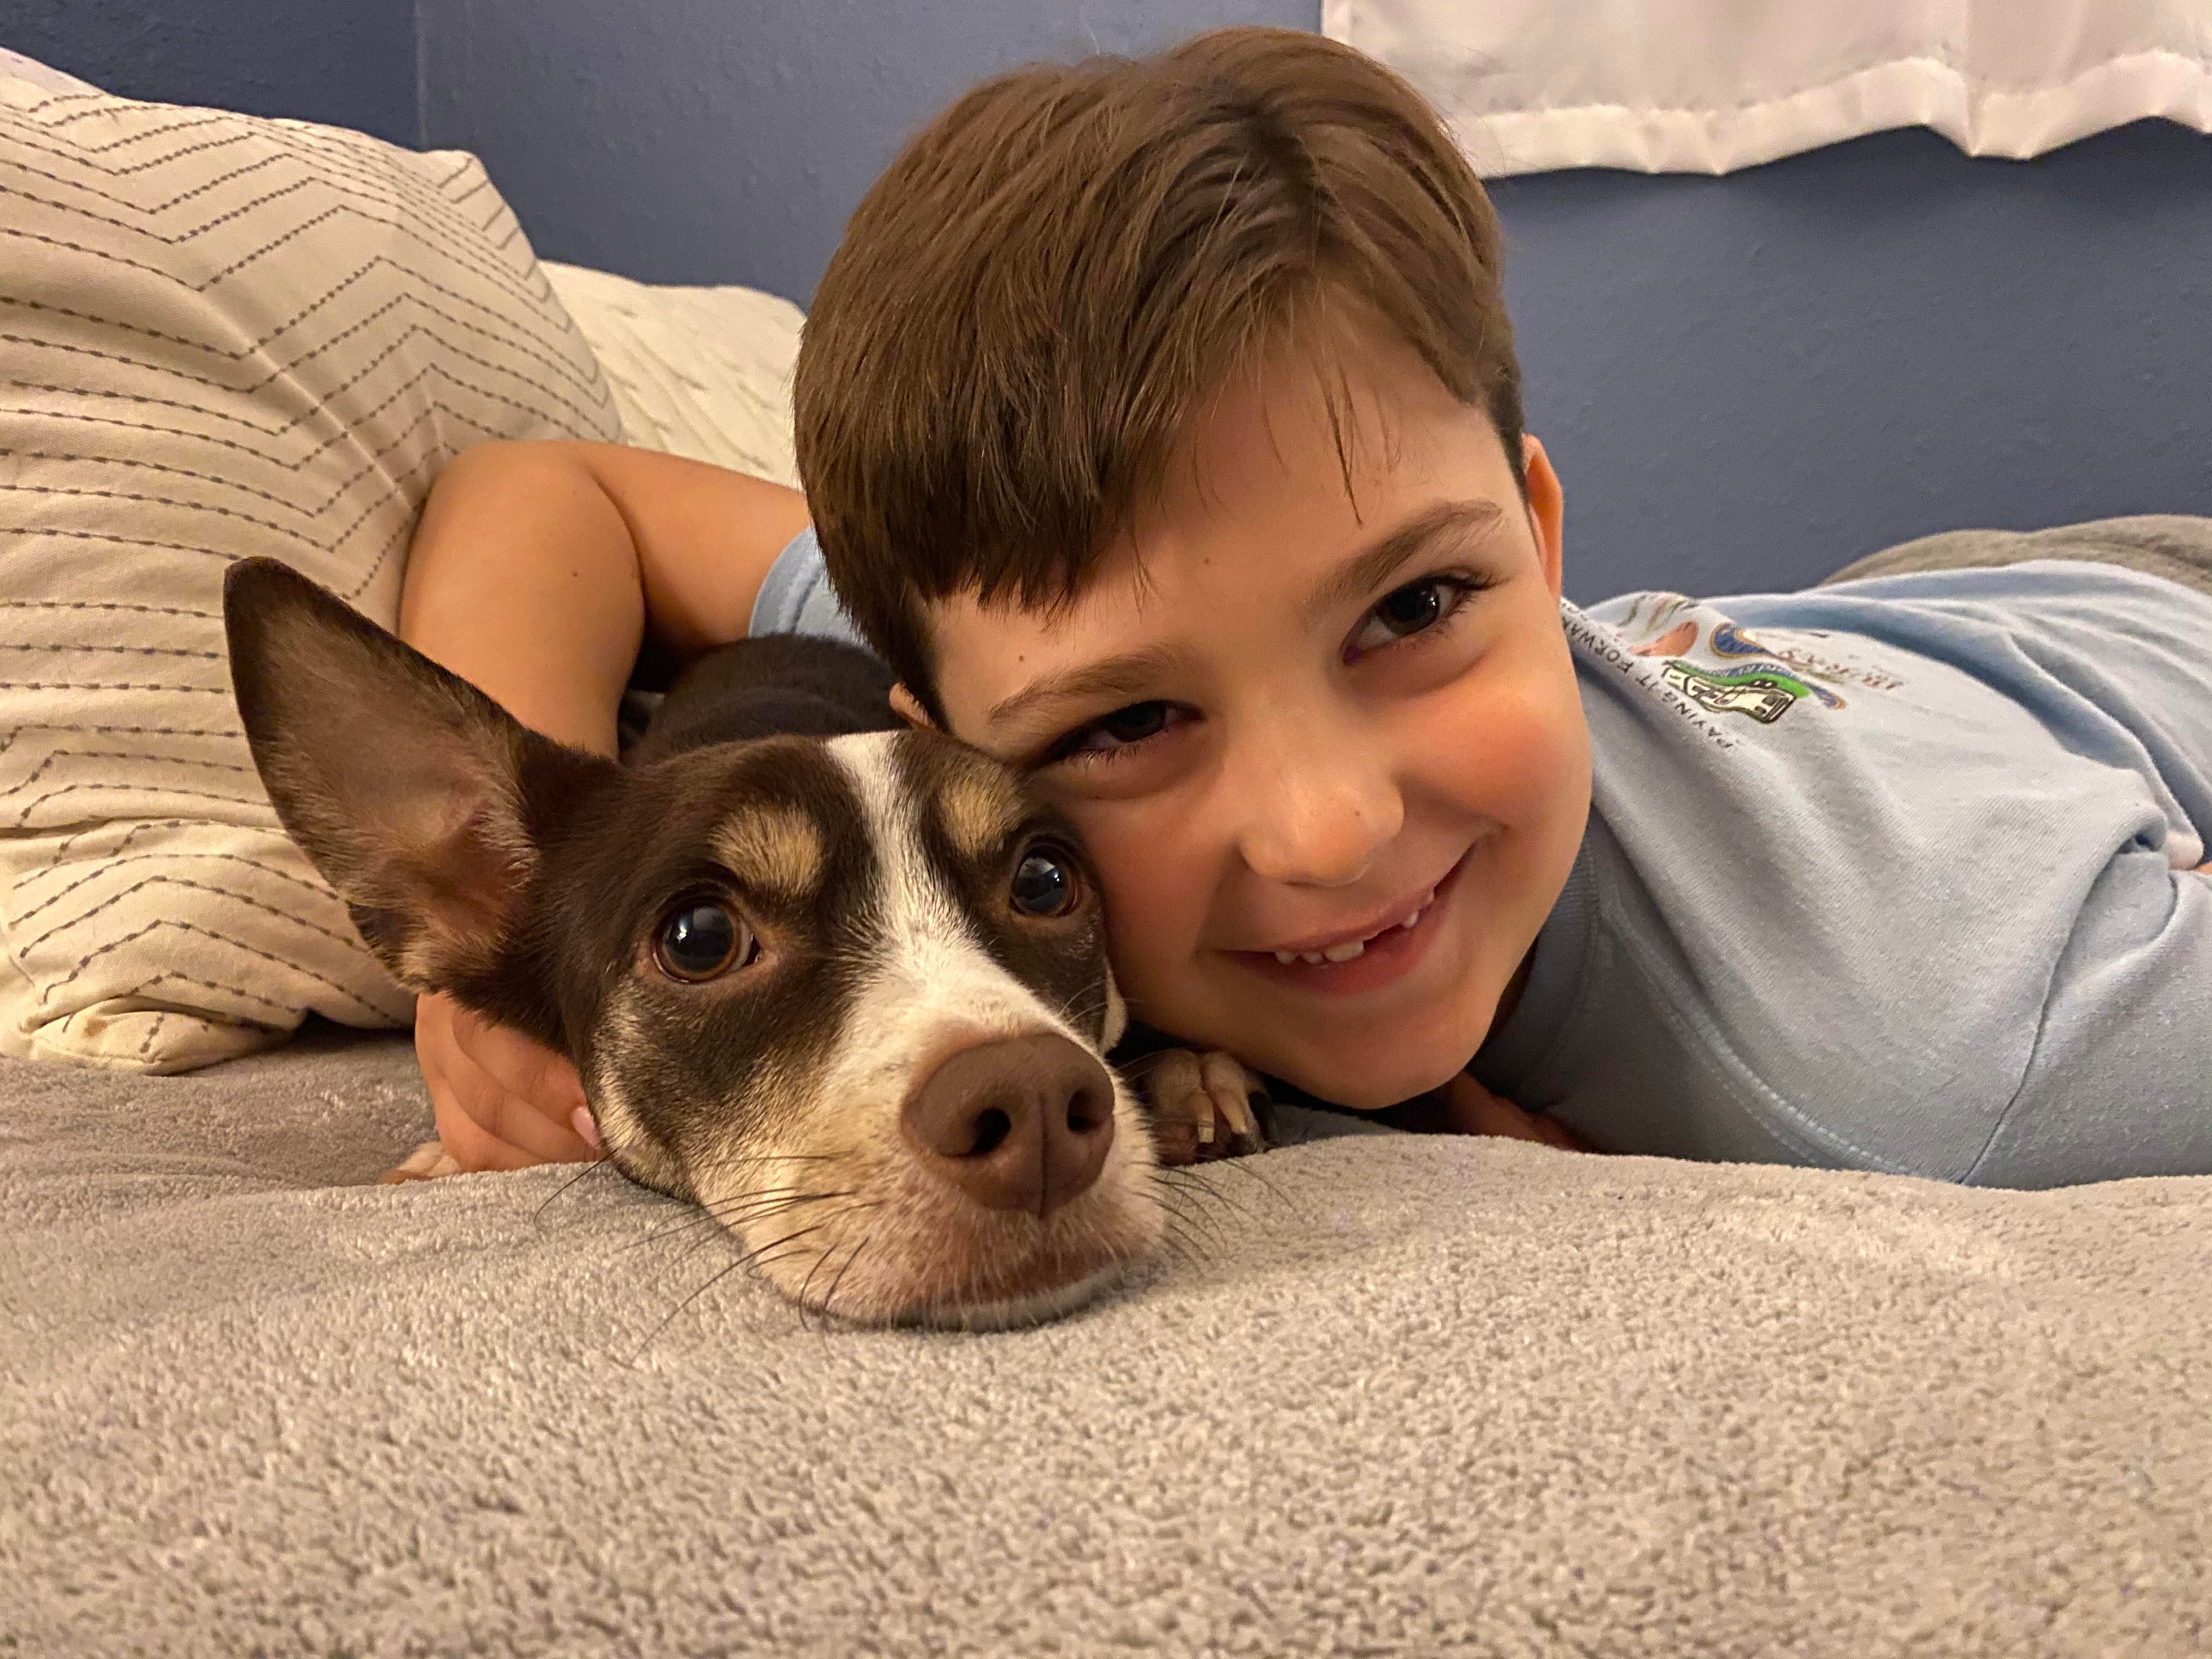 I adopted a dog for my son when I was a single mom. I found ways to work it into my budget, and it was so worth it.